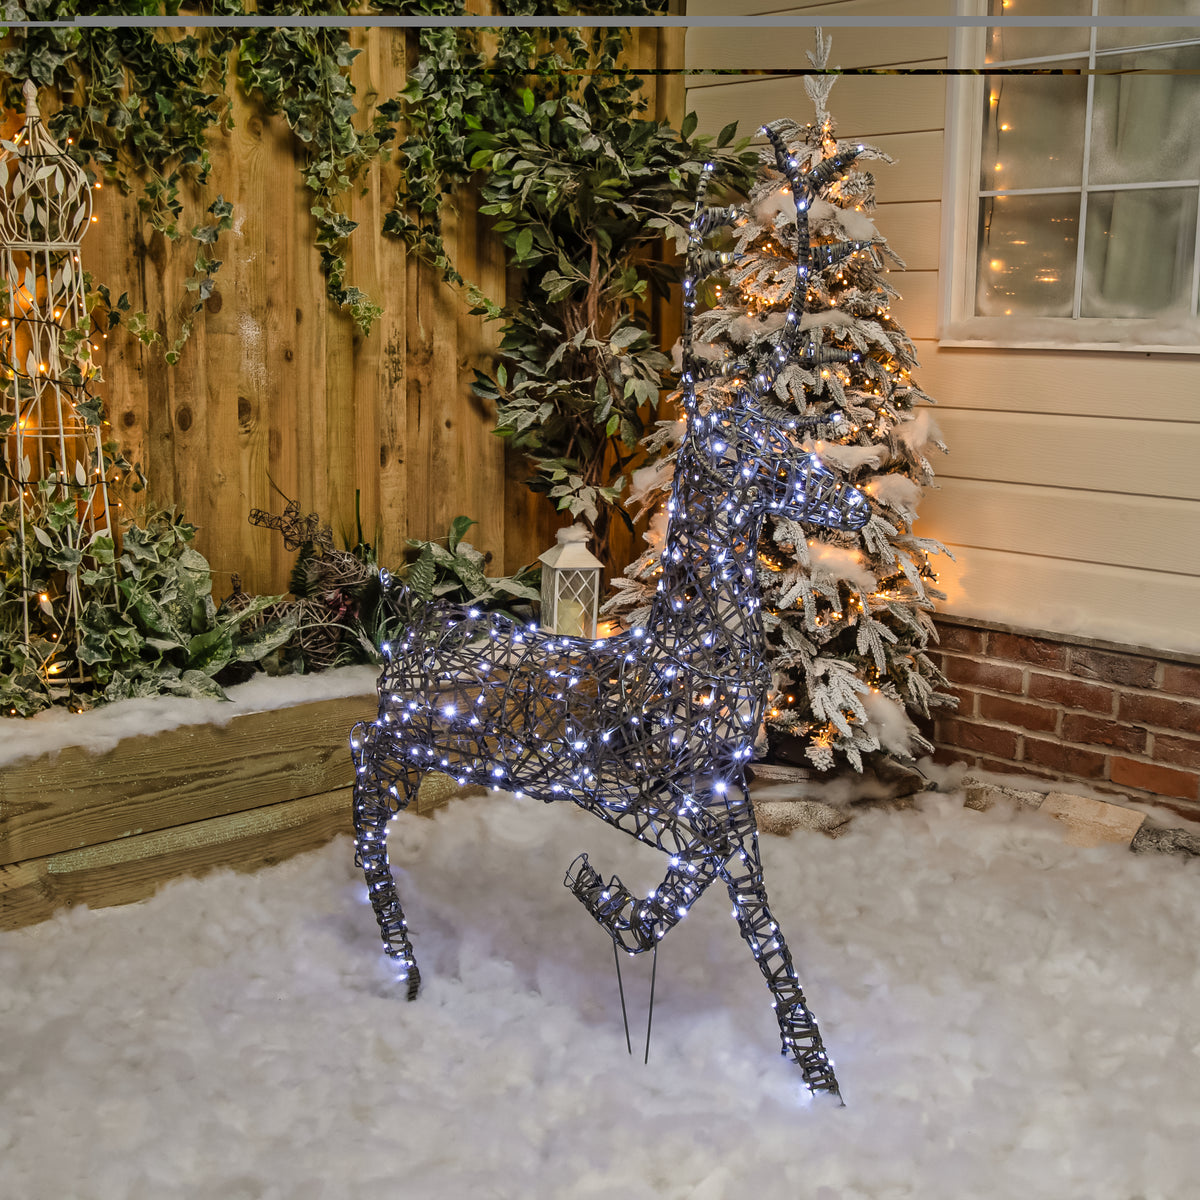 Christmas Reindeer Light - 1.4M Grey Wicker Outdoor Light Up Stag with 330 White LEDs